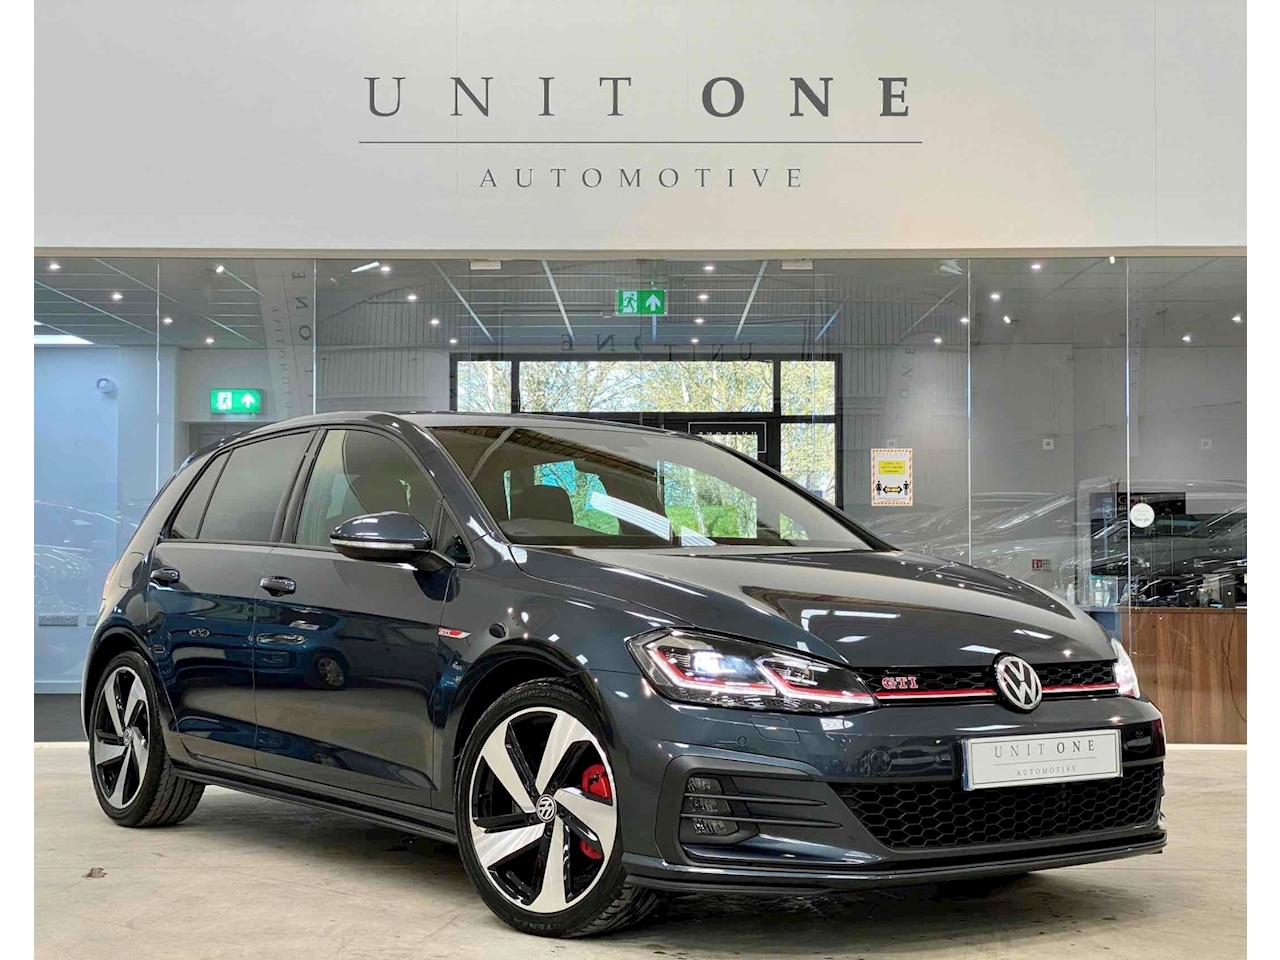 Previs site Autonoom Samenwerking Used 2018 Volkswagen Golf TSI GTI Performance 2.0 5dr Hatchback Automatic  Petrol For Sale in West Sussex | Unit One Automotive Ltd